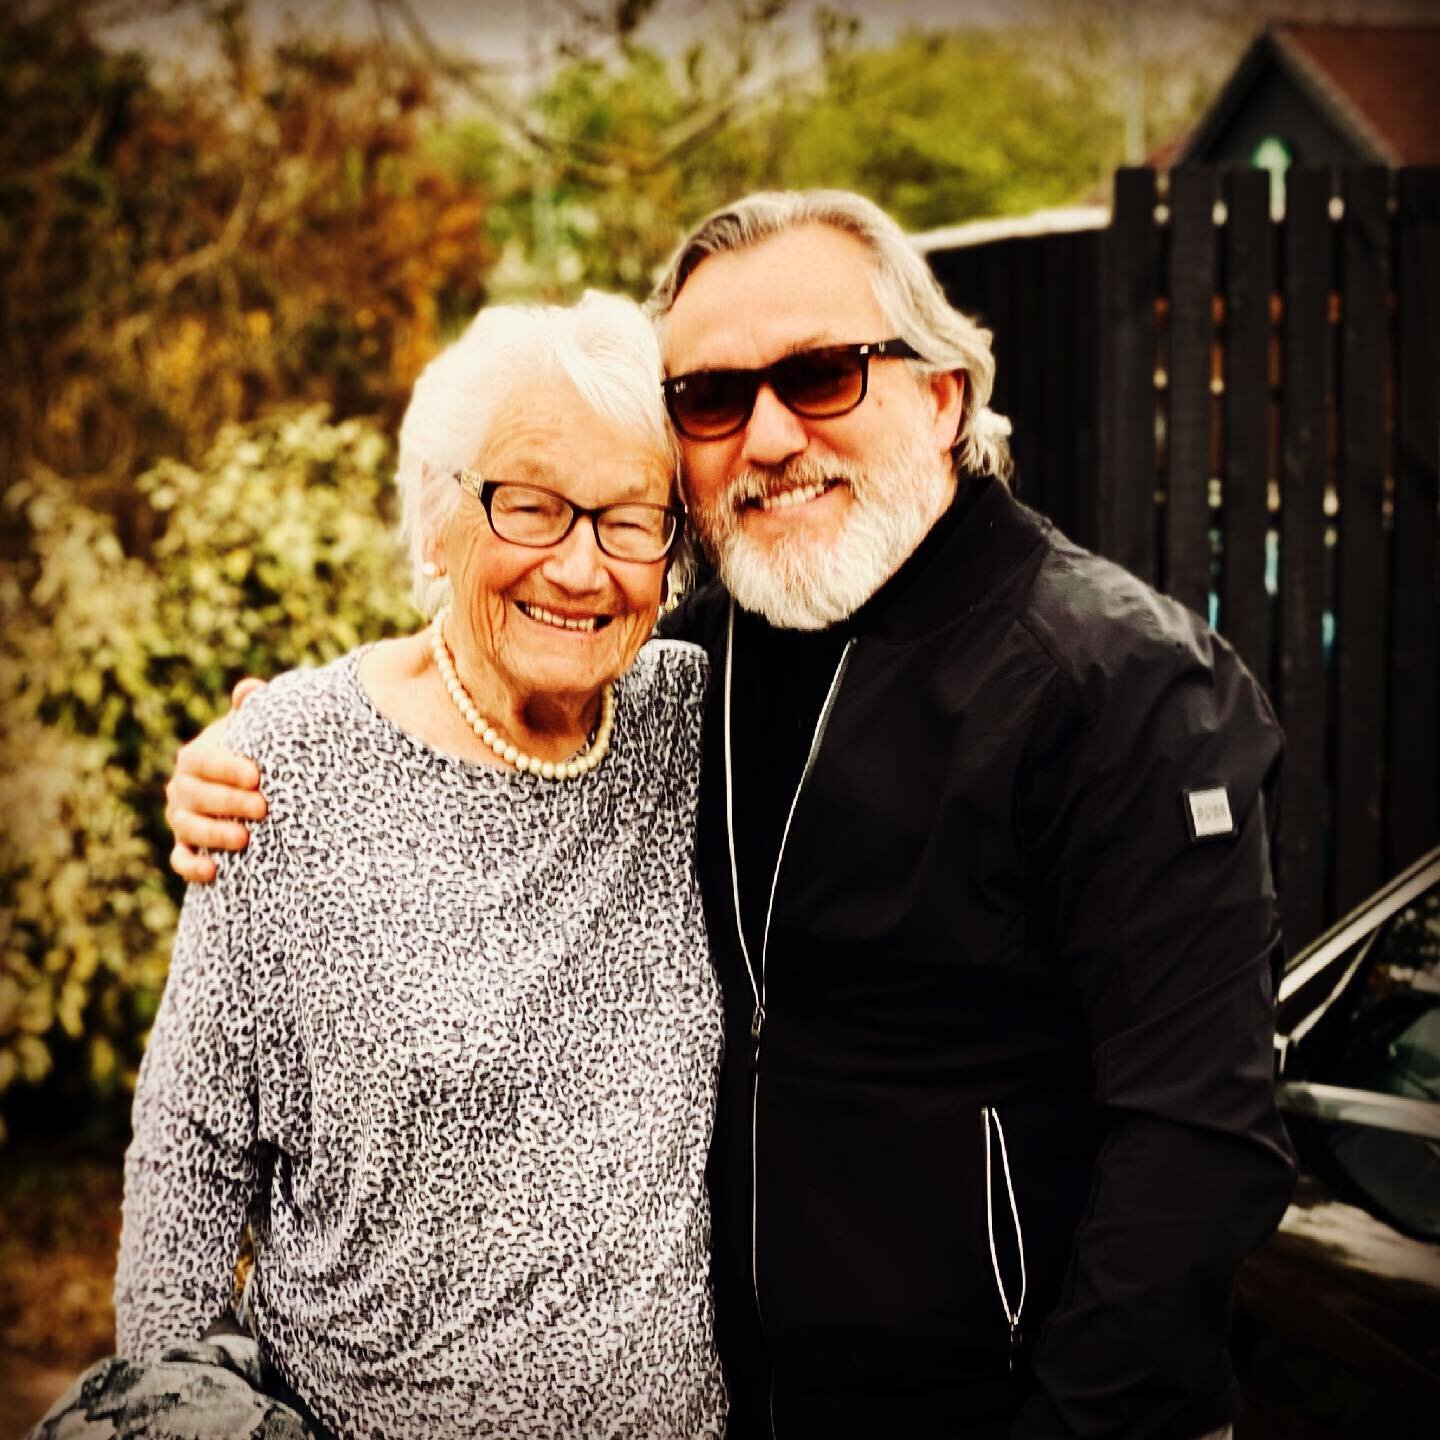 Meet my 93 year old Grandmother. I had the pleasure of her company today. Her advice has always been &ldquo;get out and have an adventure&rdquo;. .
.
#grandma #legend #grandmother #keepgoing #lifeisshort